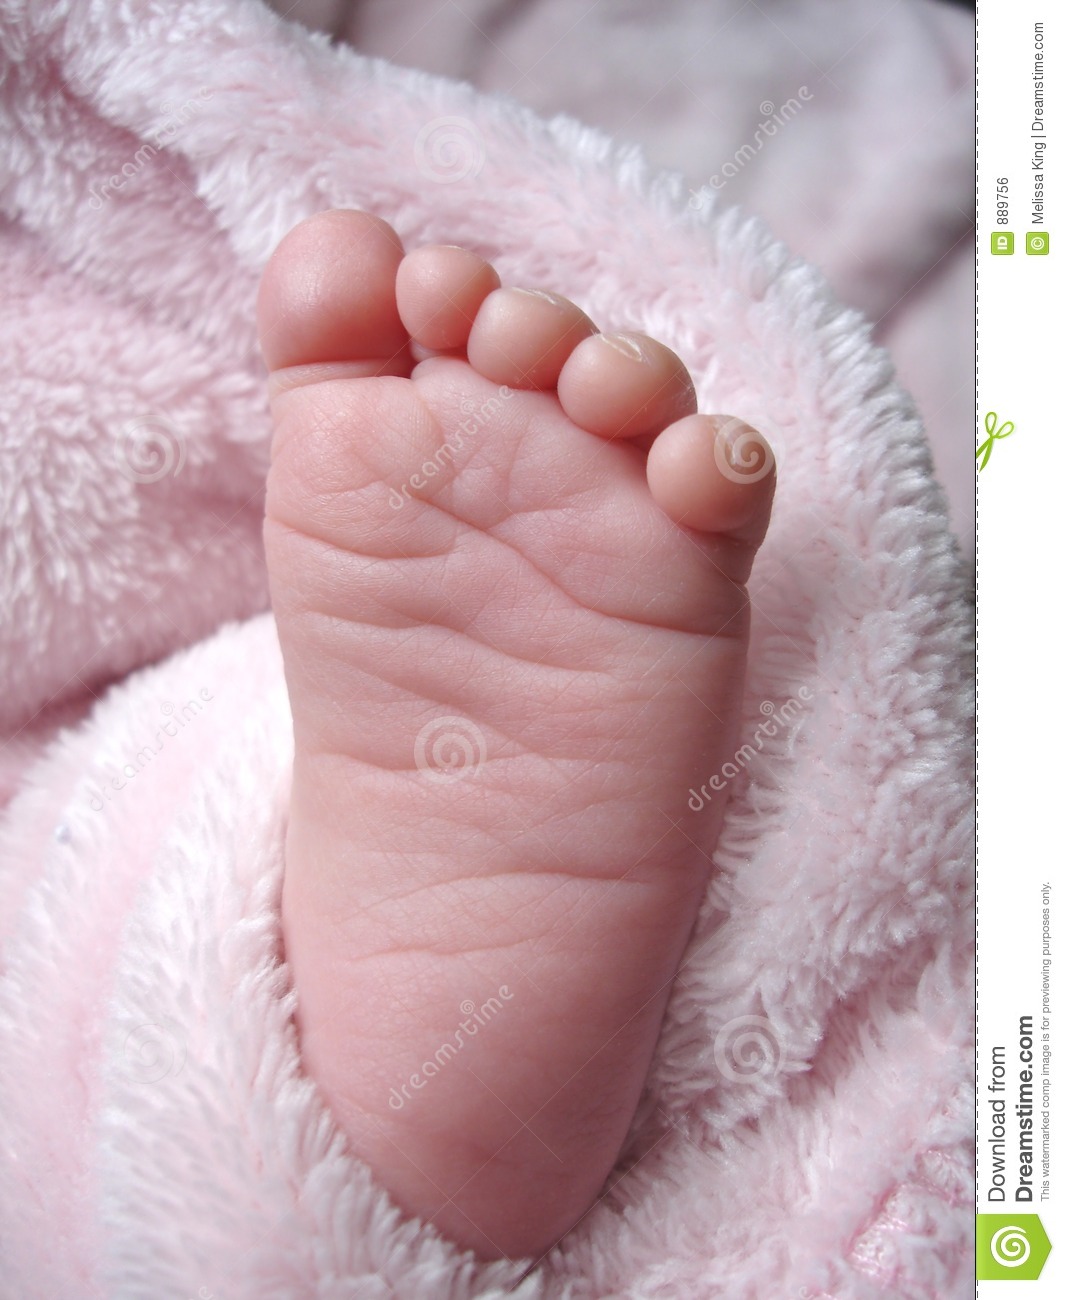 Little Foot Royalty Free Stock Image   Image  889756